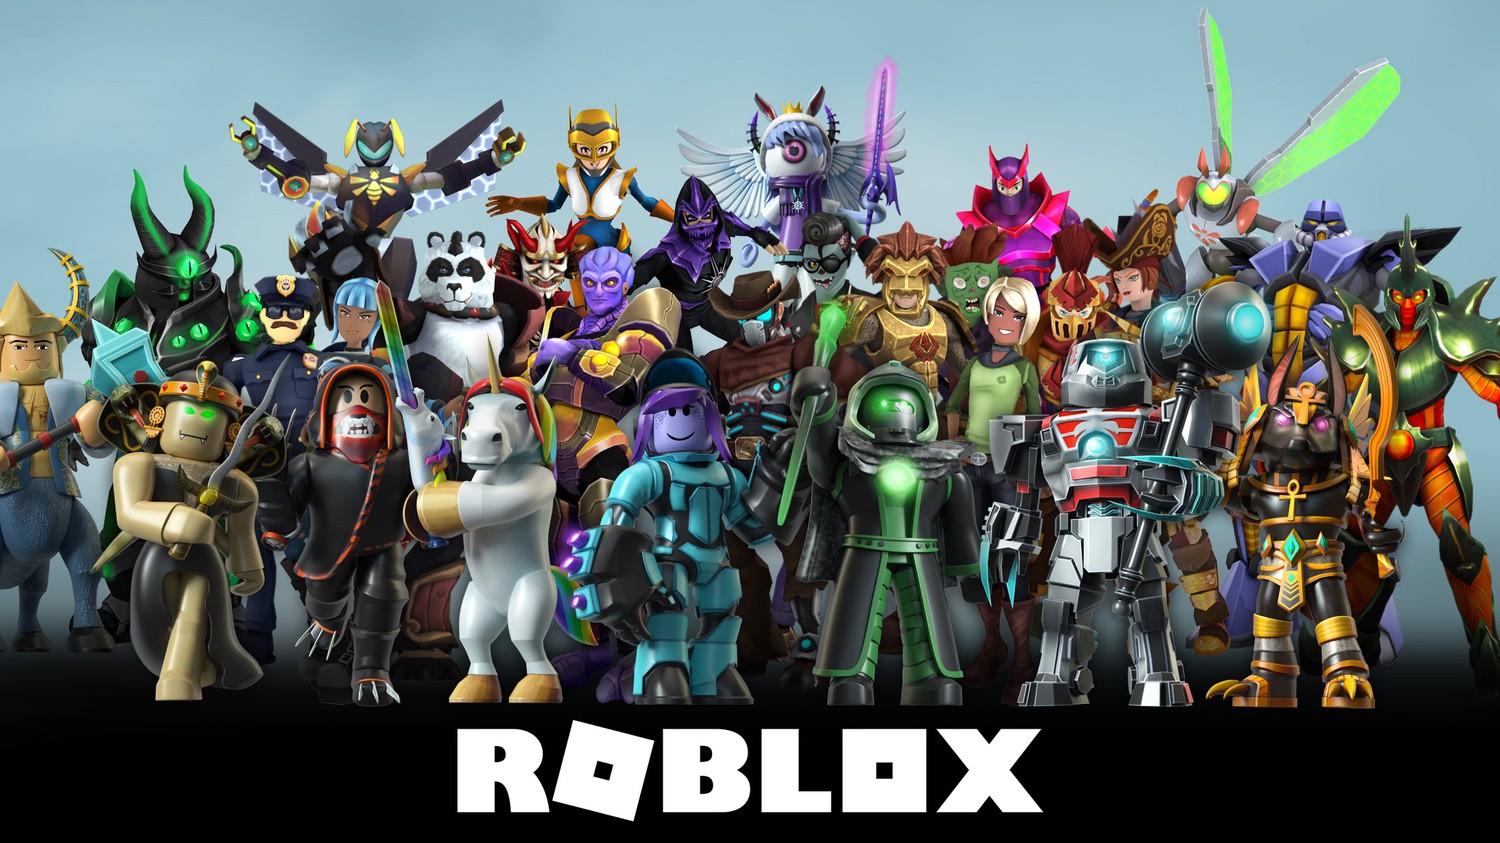 How to Enjoy Roblox Games on PC